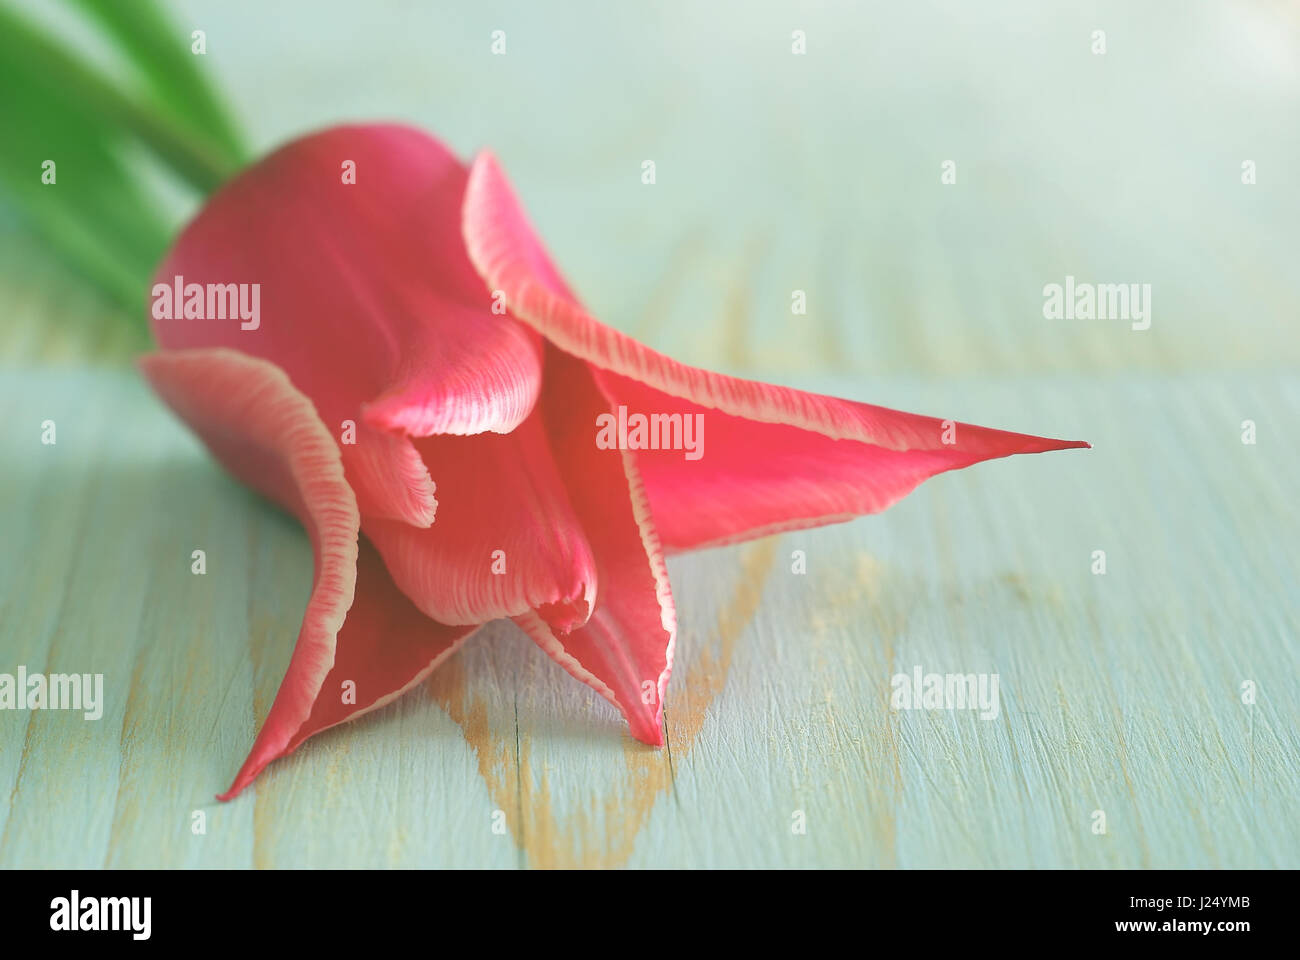 Beautiful pink tulip flower background. Macro selective focus tulip closeup natural beauty. Retro soft wooden table vintage greeting card template wit Stock Photo